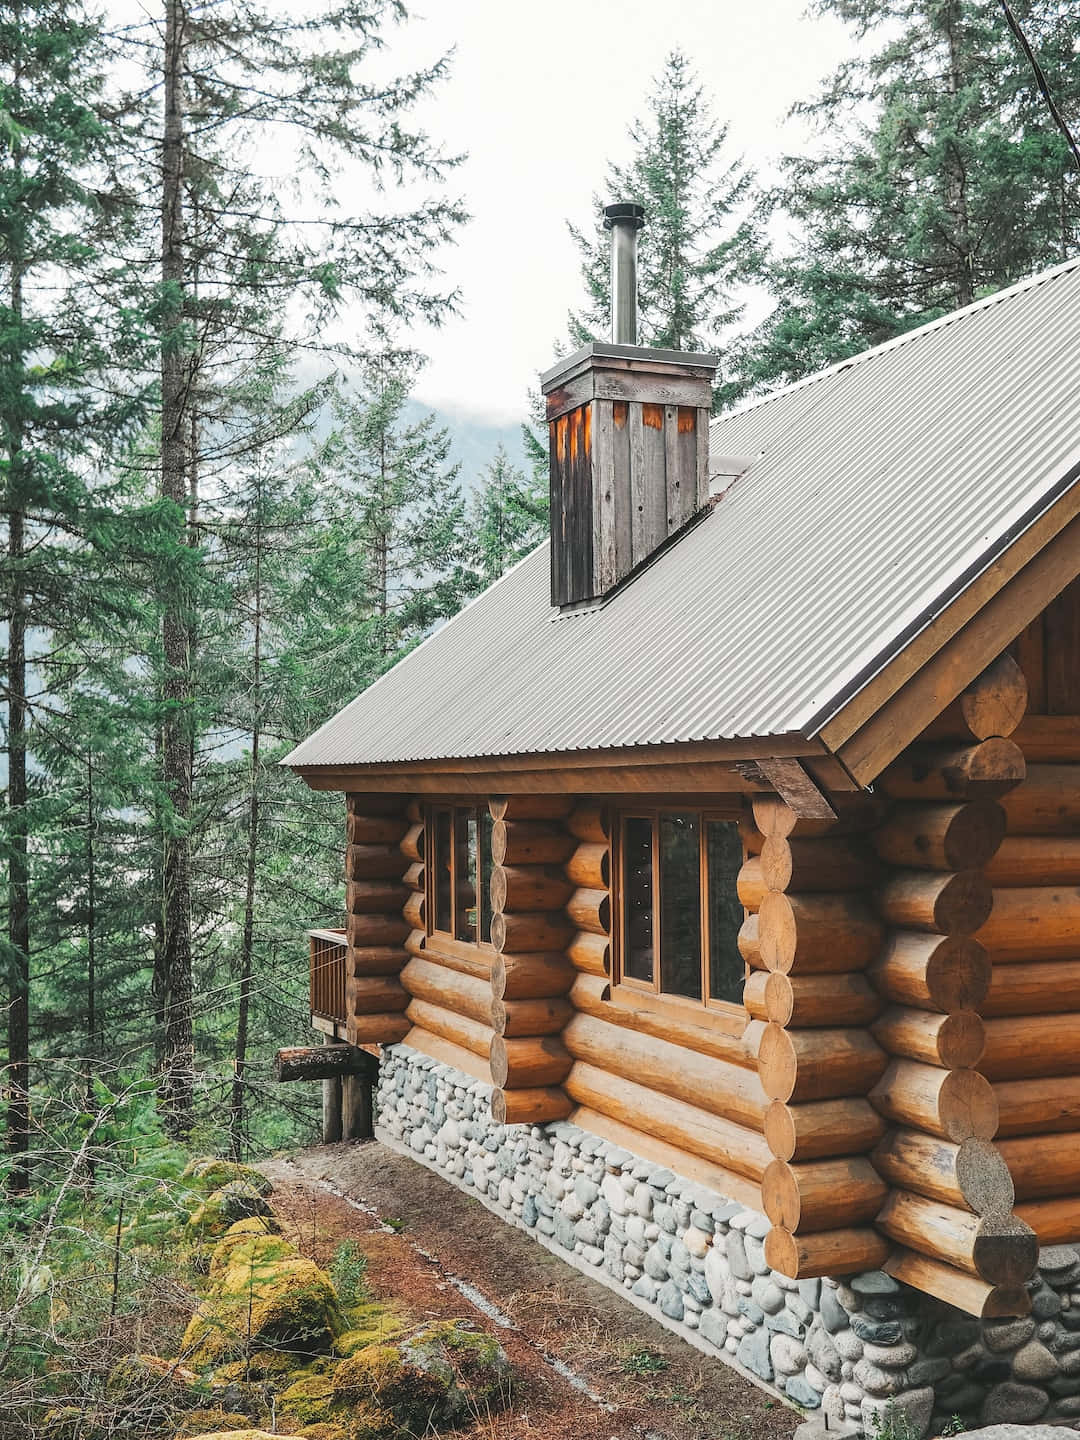 Rustic Log Cabin in the Woods